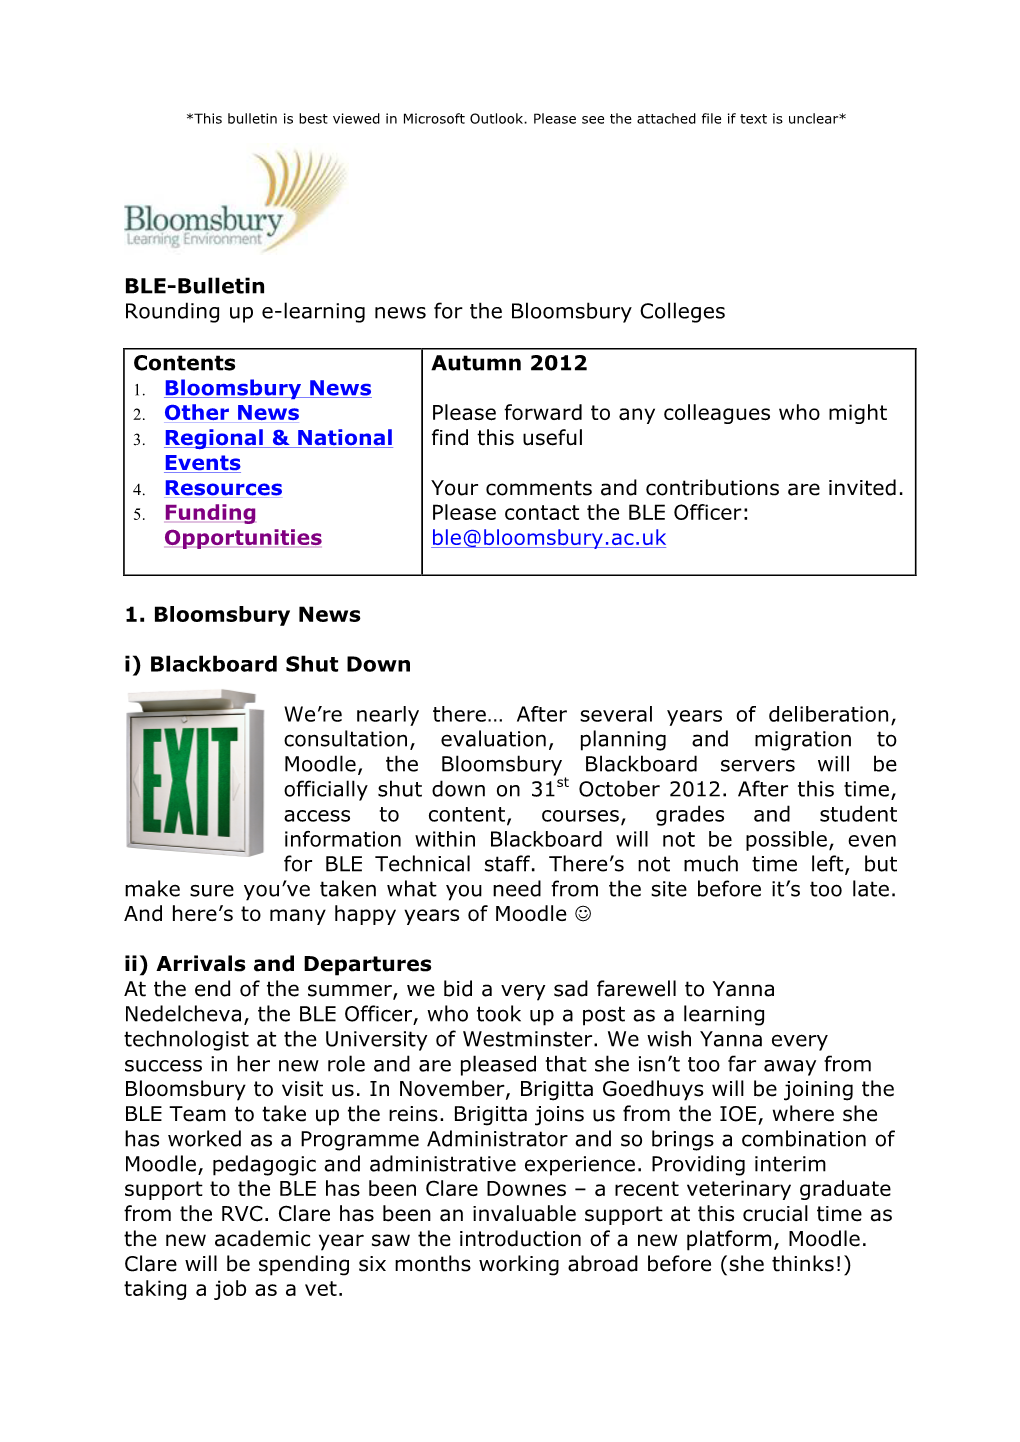 BLE-Bulletin Rounding up E-Learning News for the Bloomsbury Colleges